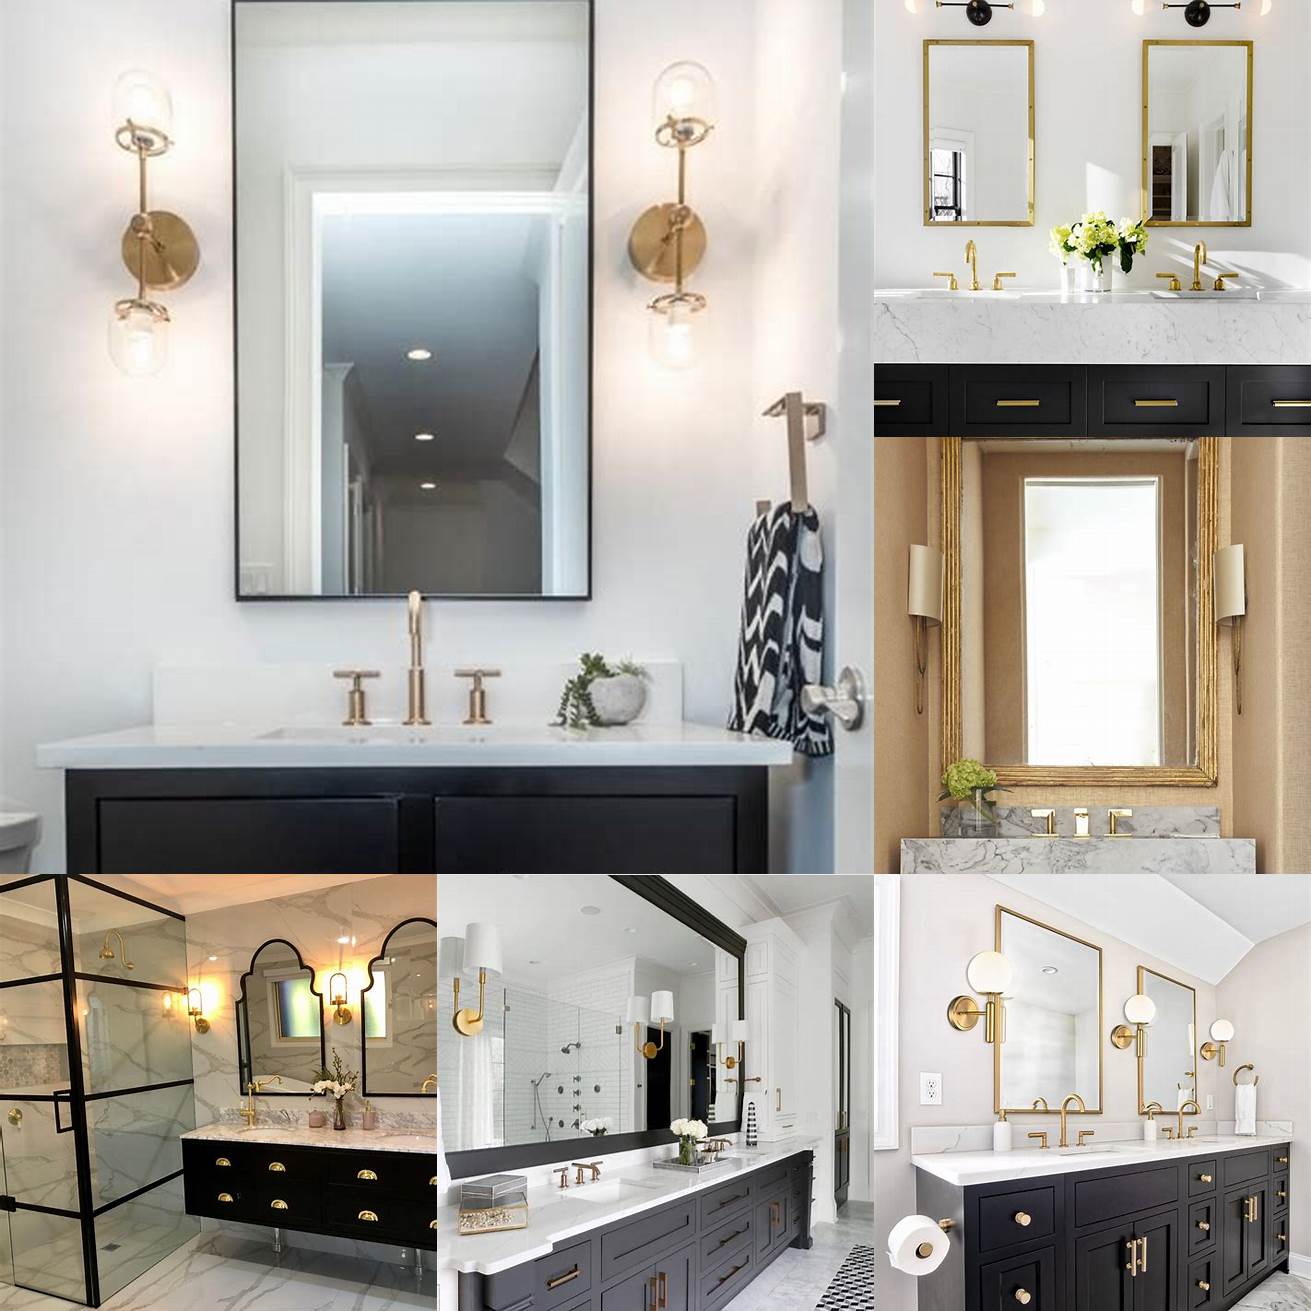 A sleek black slim vanity with a marble countertop and gold hardware